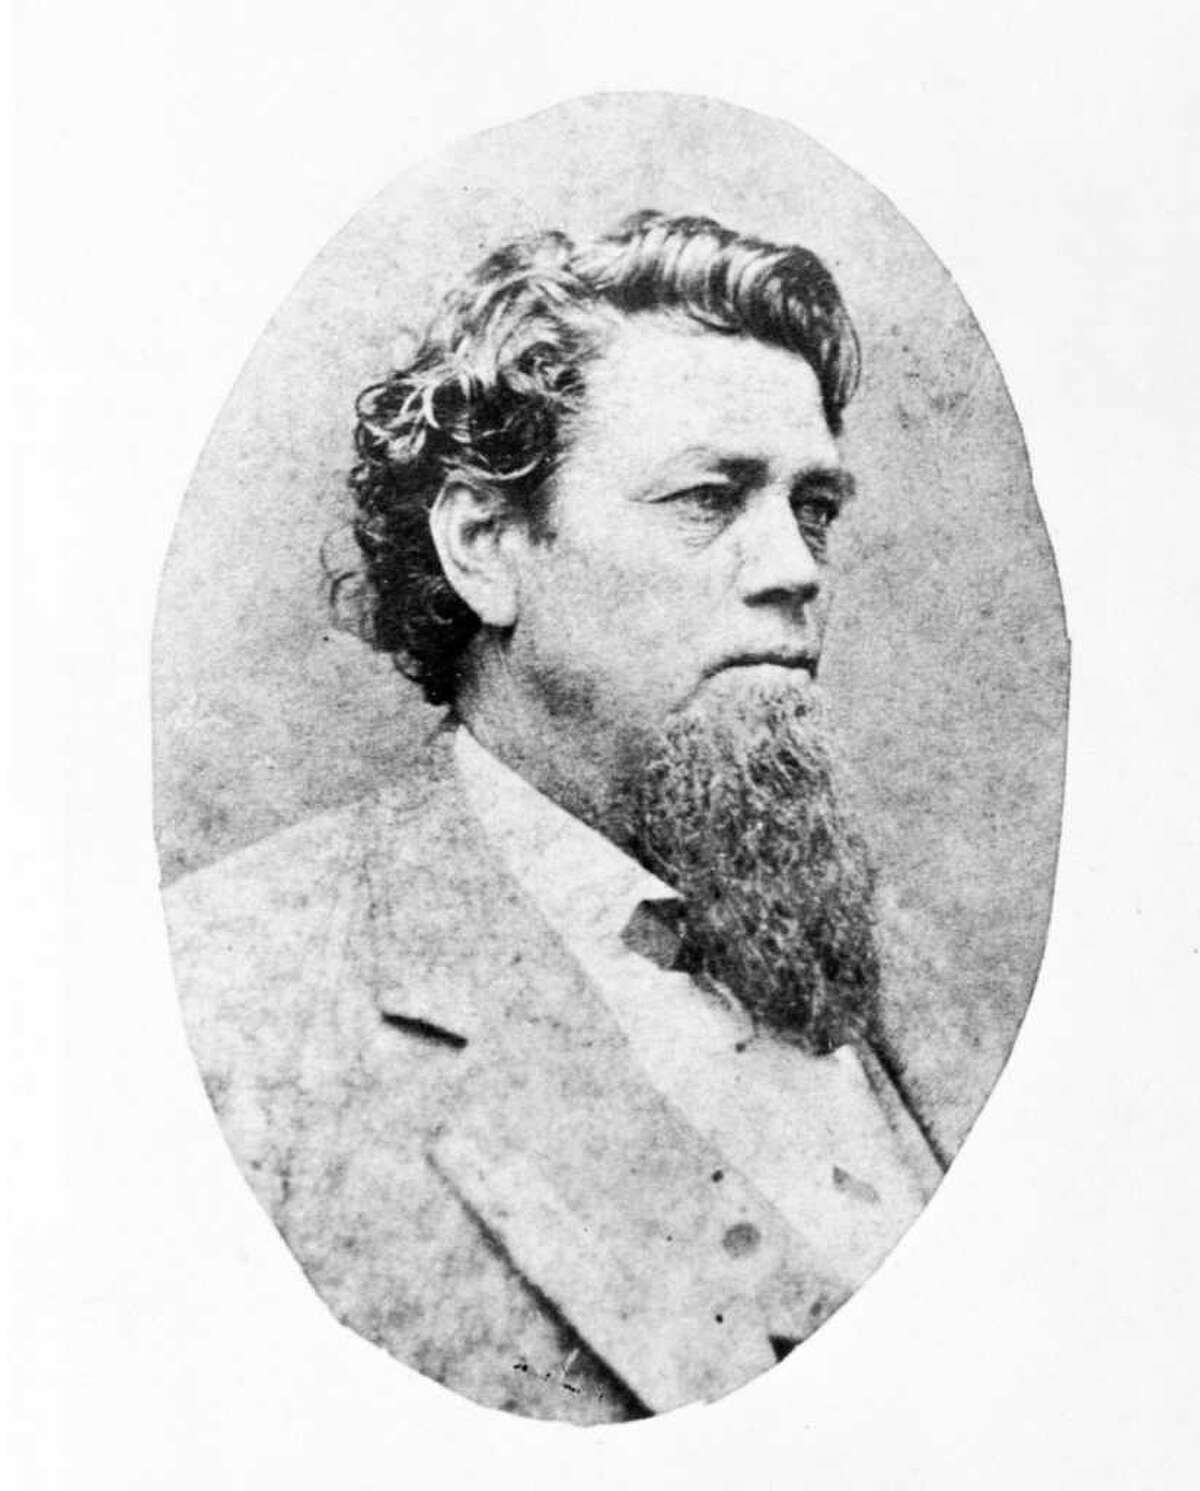 The town of Kingsville, Texas is named for Richard King, the founder and owner of the King Ranch. He was born in 1824 in New York City. 